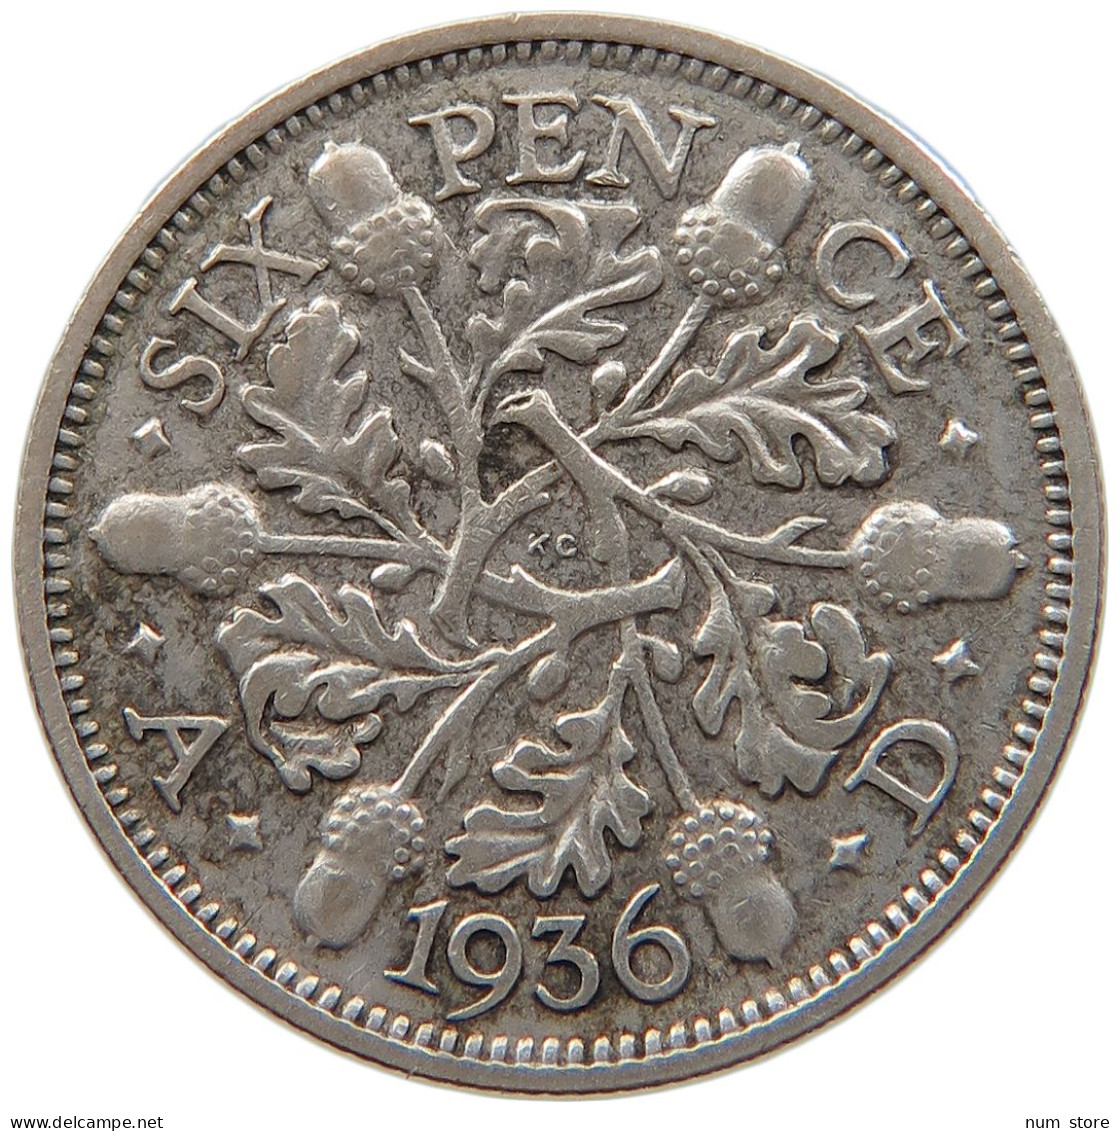 GREAT BRITAIN SIXPENCE 1936 #s101 0127 - H. 6 Pence